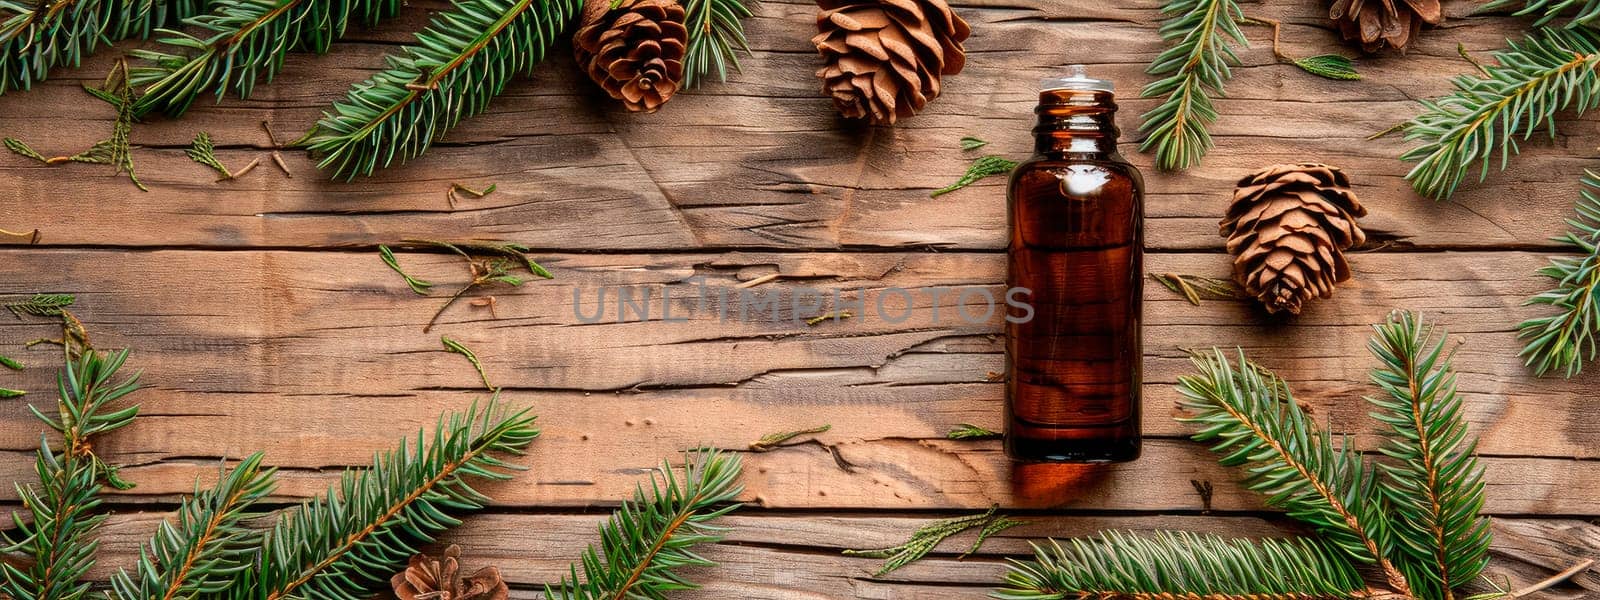 fir essential oil in a bottle. Selective focus. Nature.